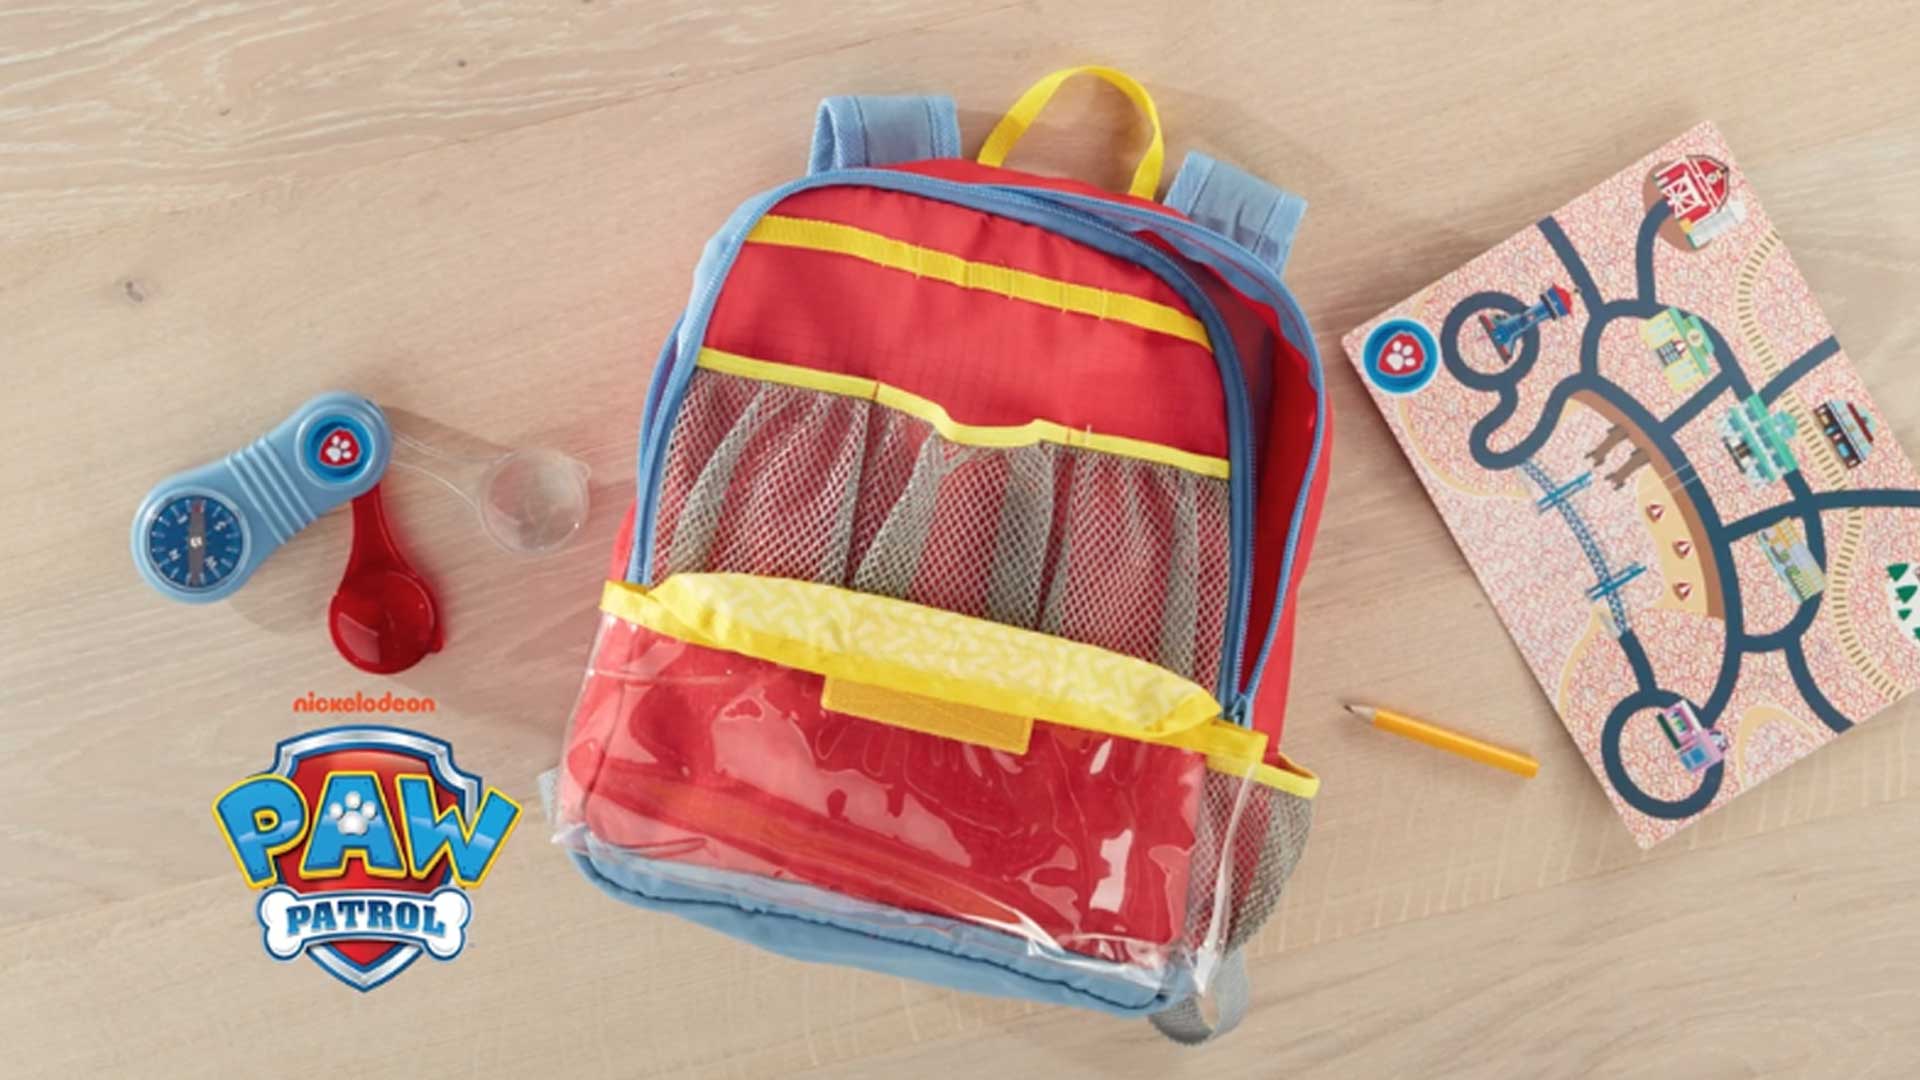 Commercial studio product photography and video production in Westchester, New York for Melissa & Doug Paw Patrol backpack